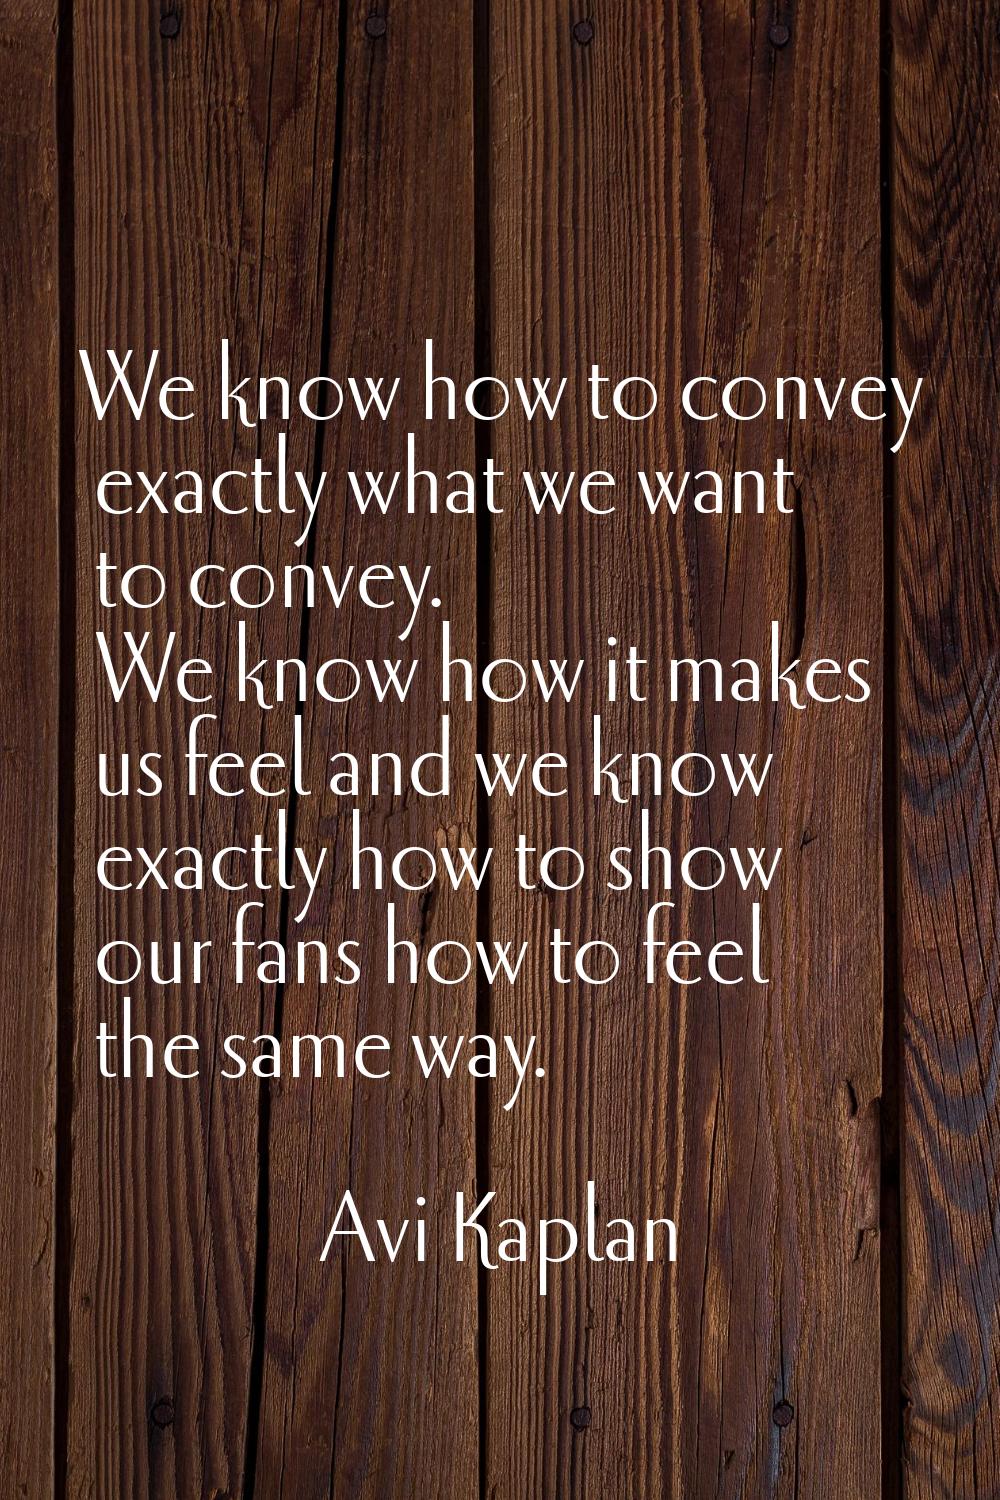 We know how to convey exactly what we want to convey. We know how it makes us feel and we know exac